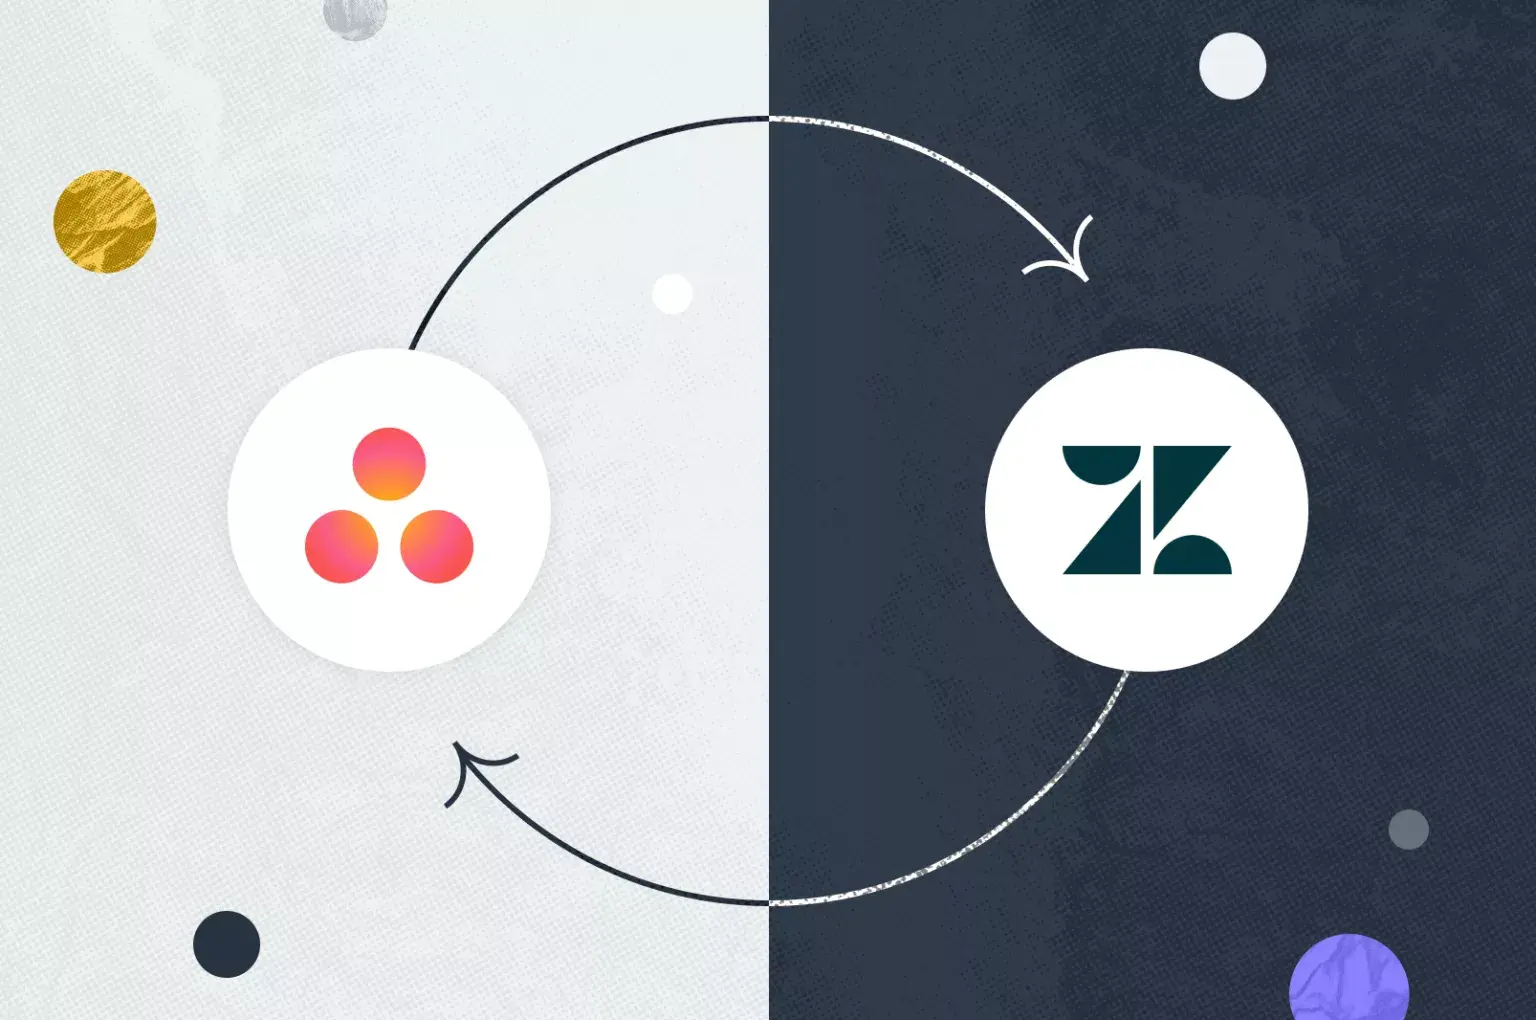 New: Resolve service tickets faster and more accurately with Asana for Zendesk